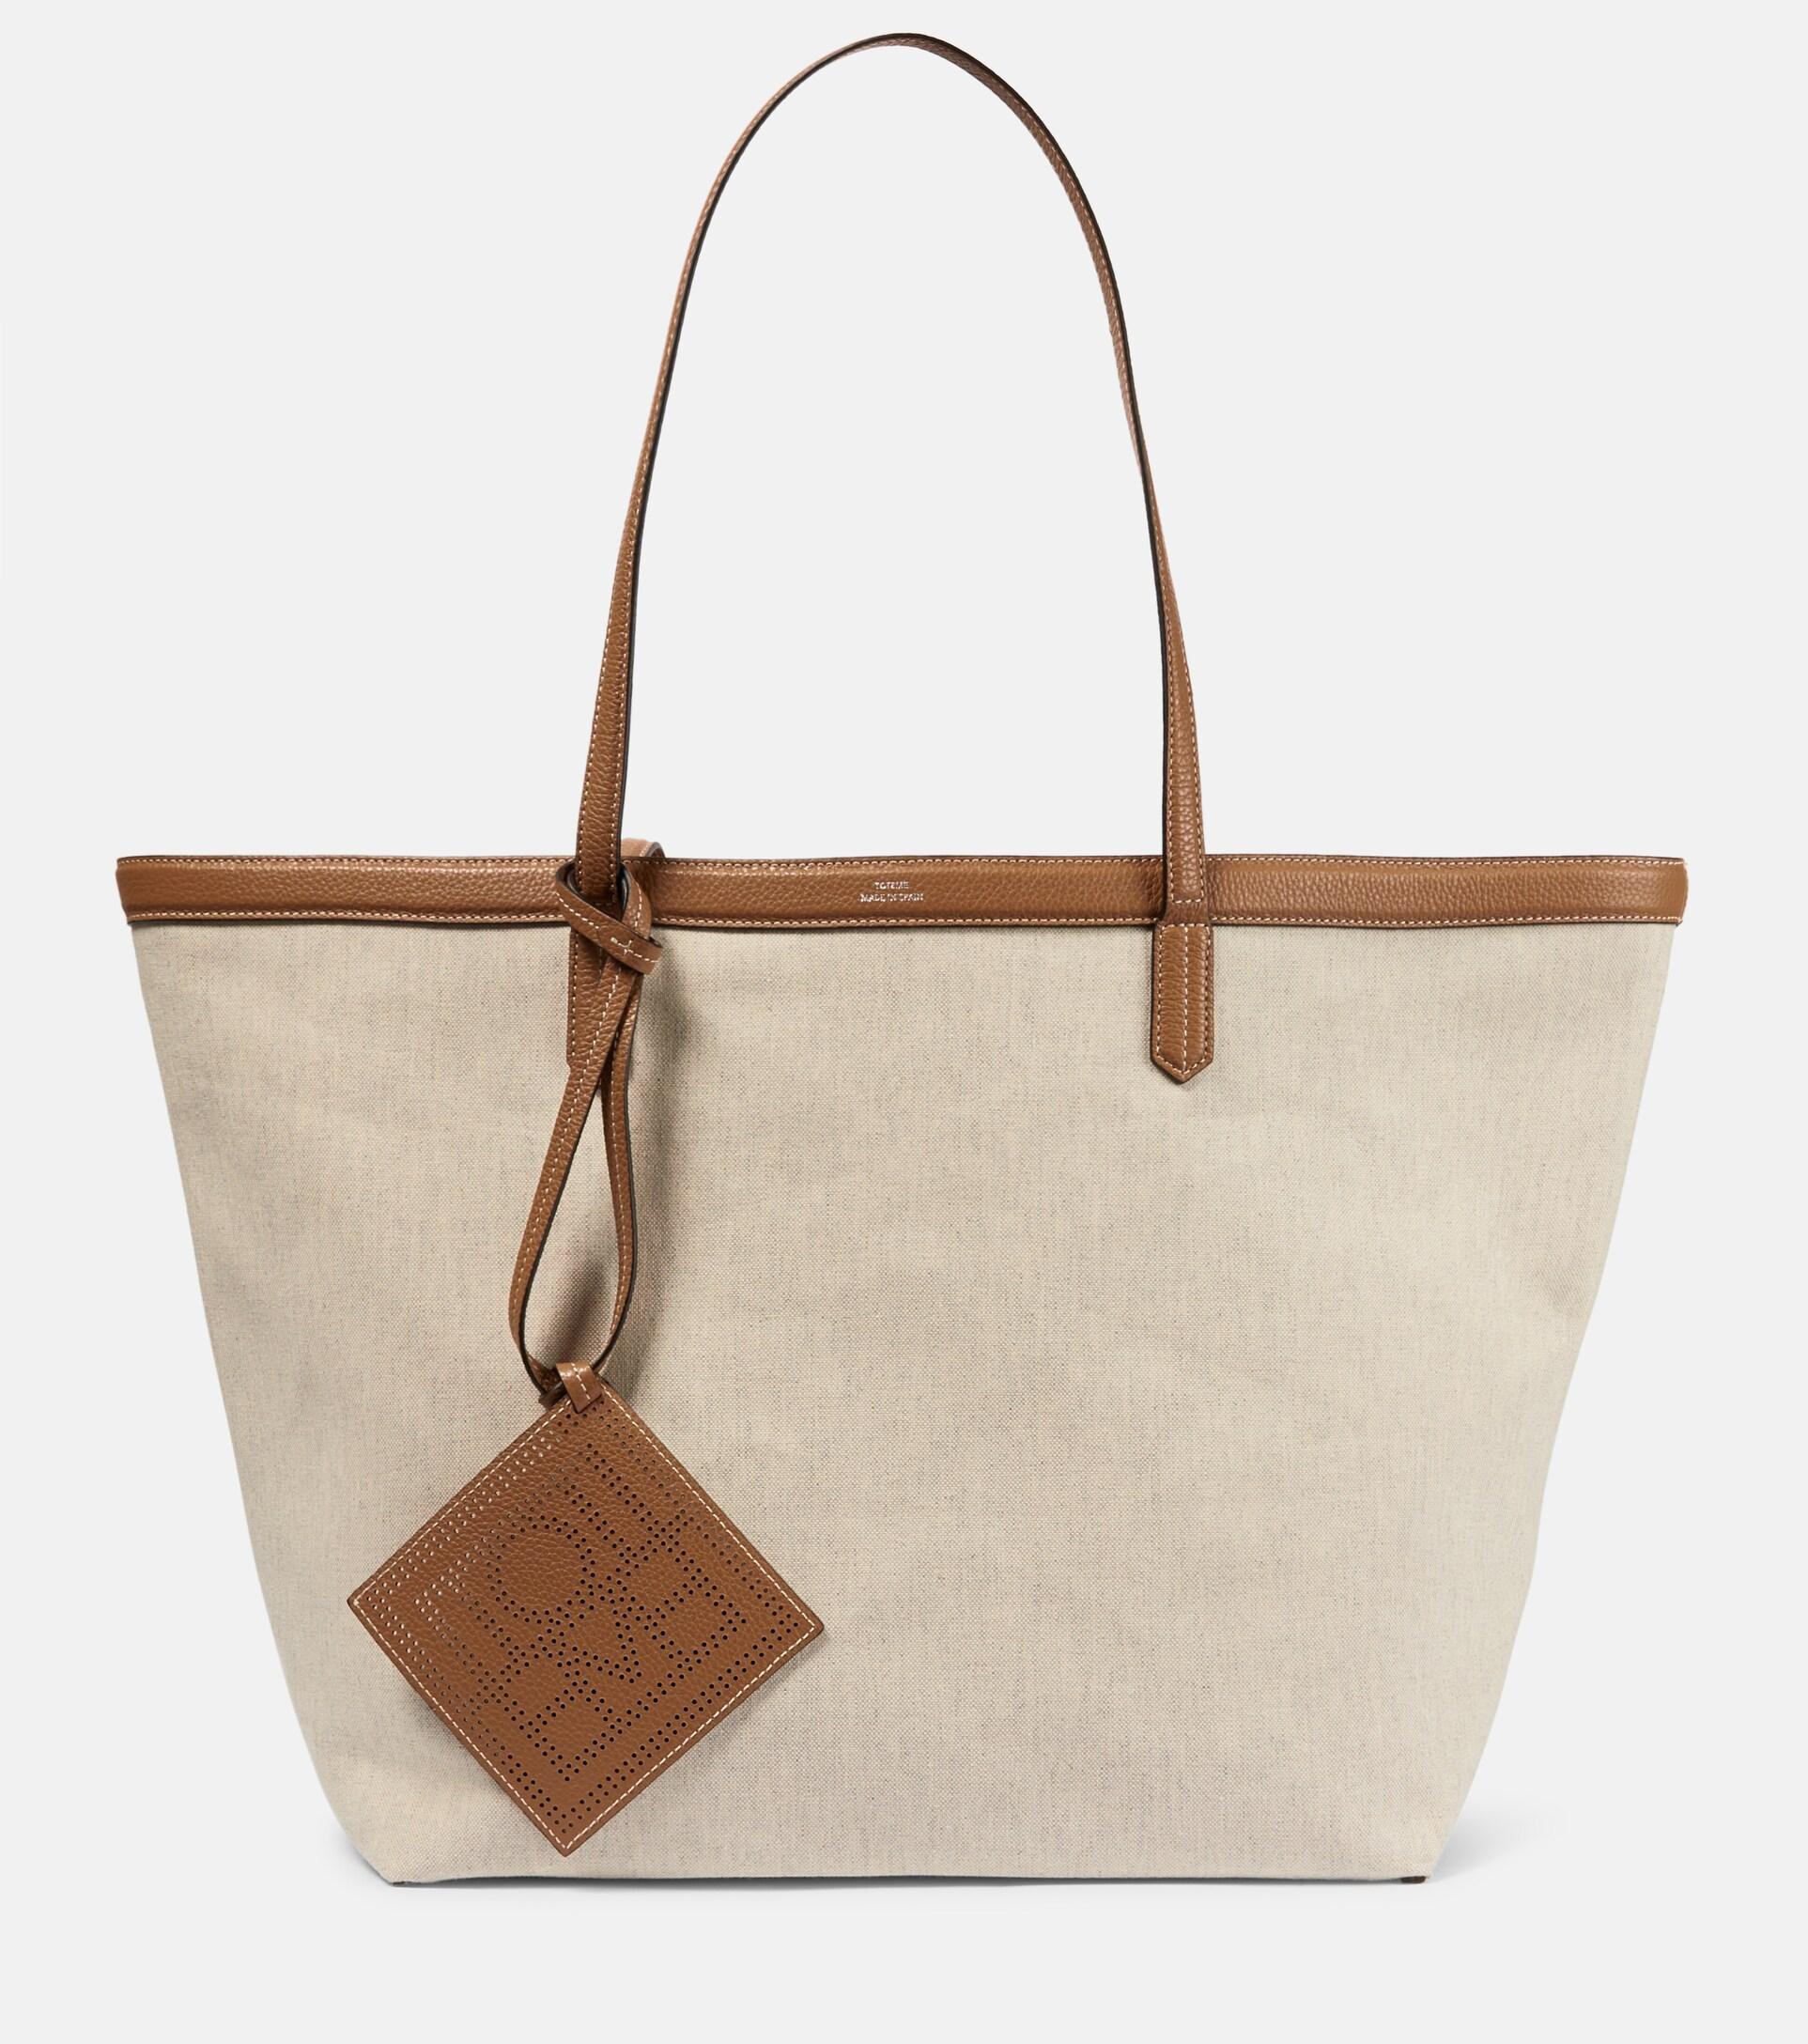 NANTUCKET PERSONALIZED TOTE WITH LEATHER TRIM - LEATHER PATCH